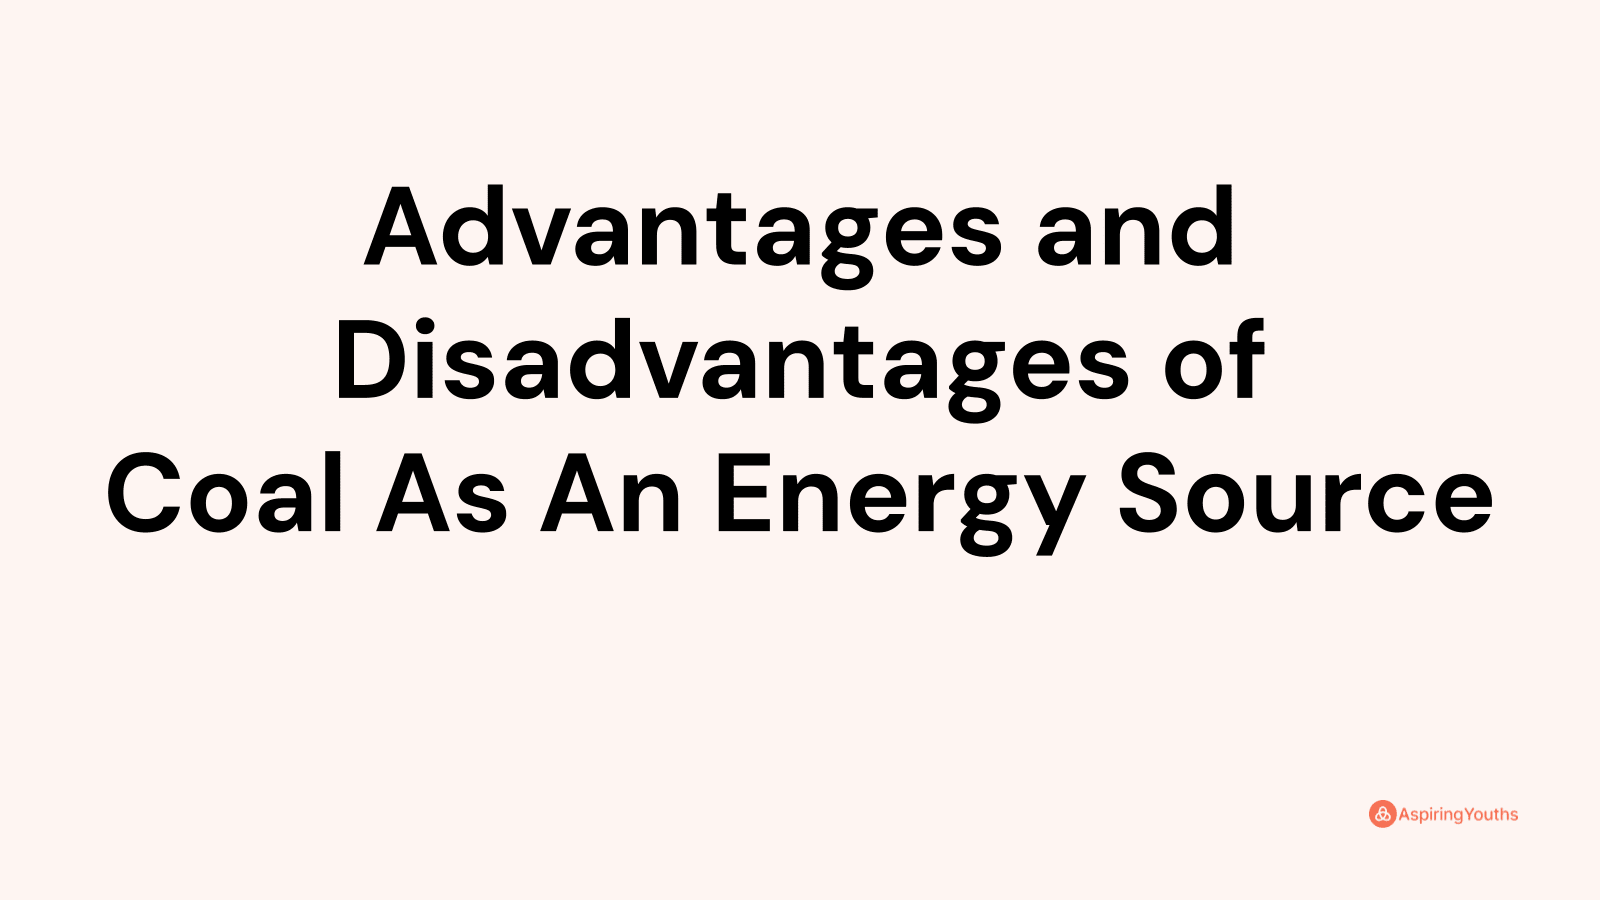 Advantages and disadvantages of Coal As An Energy Source